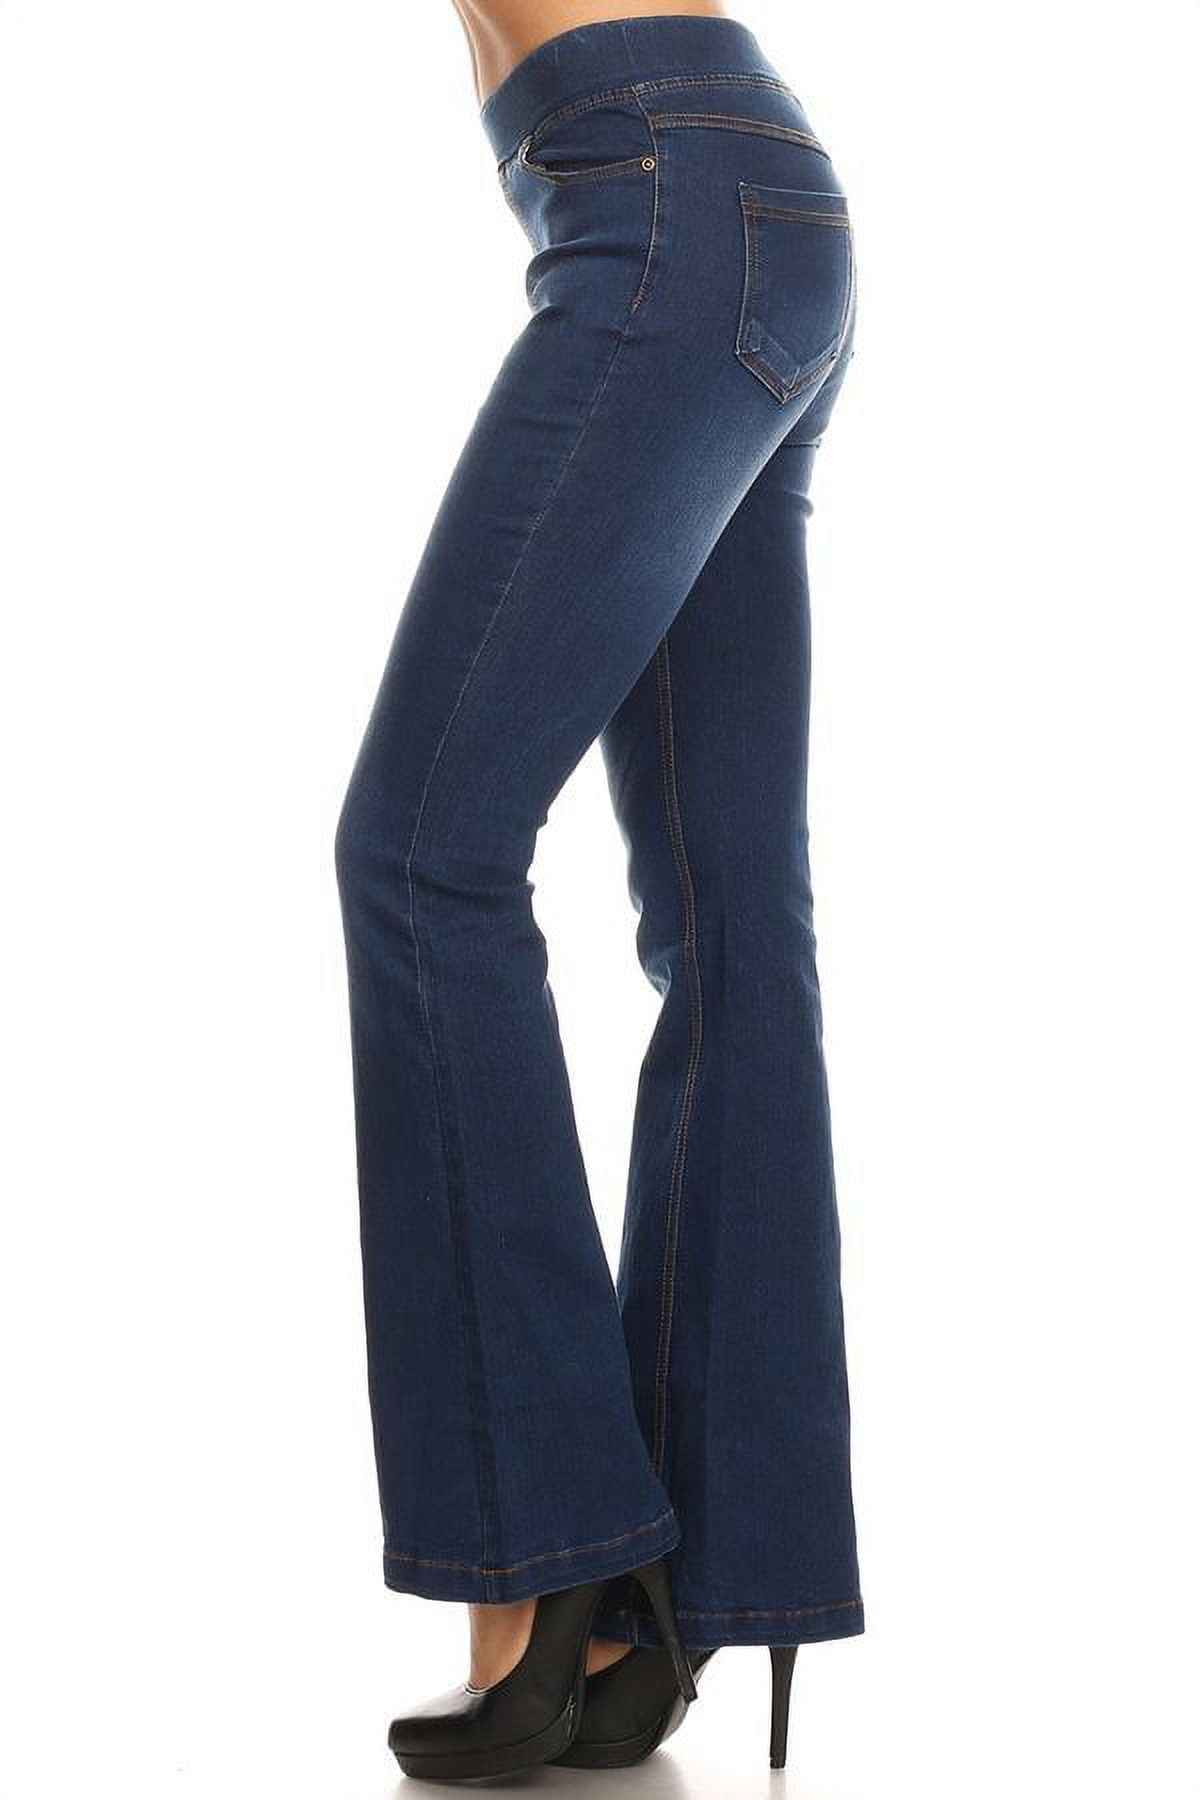 Basic young contemporary pull on denim flare jeans with pockets ...